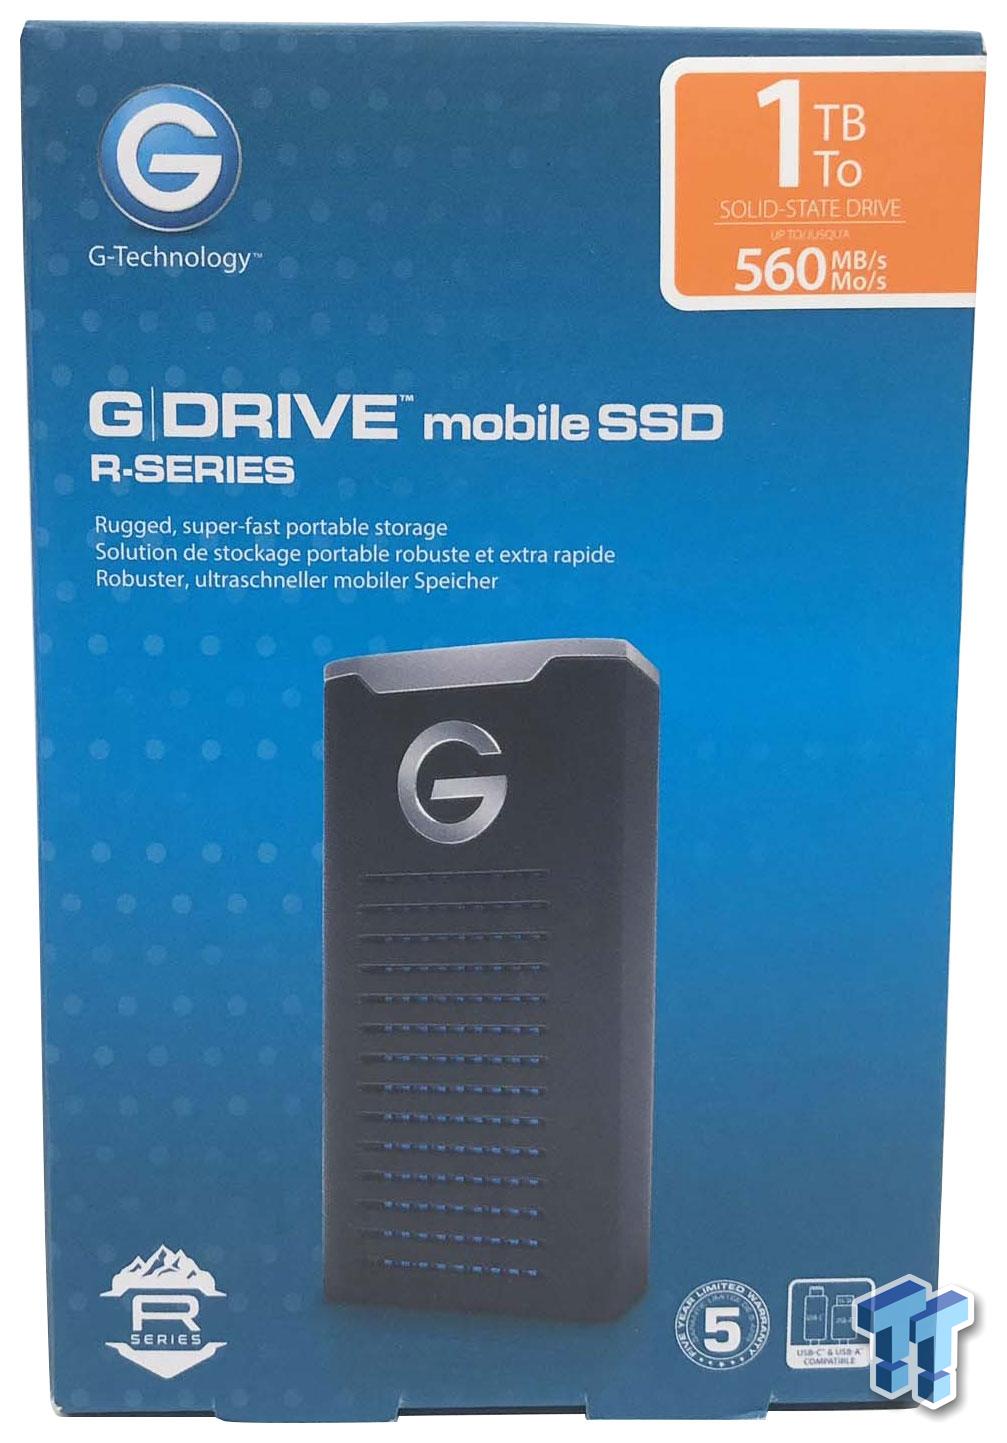 G-Technology Mobile SSD R Series 1TB Review